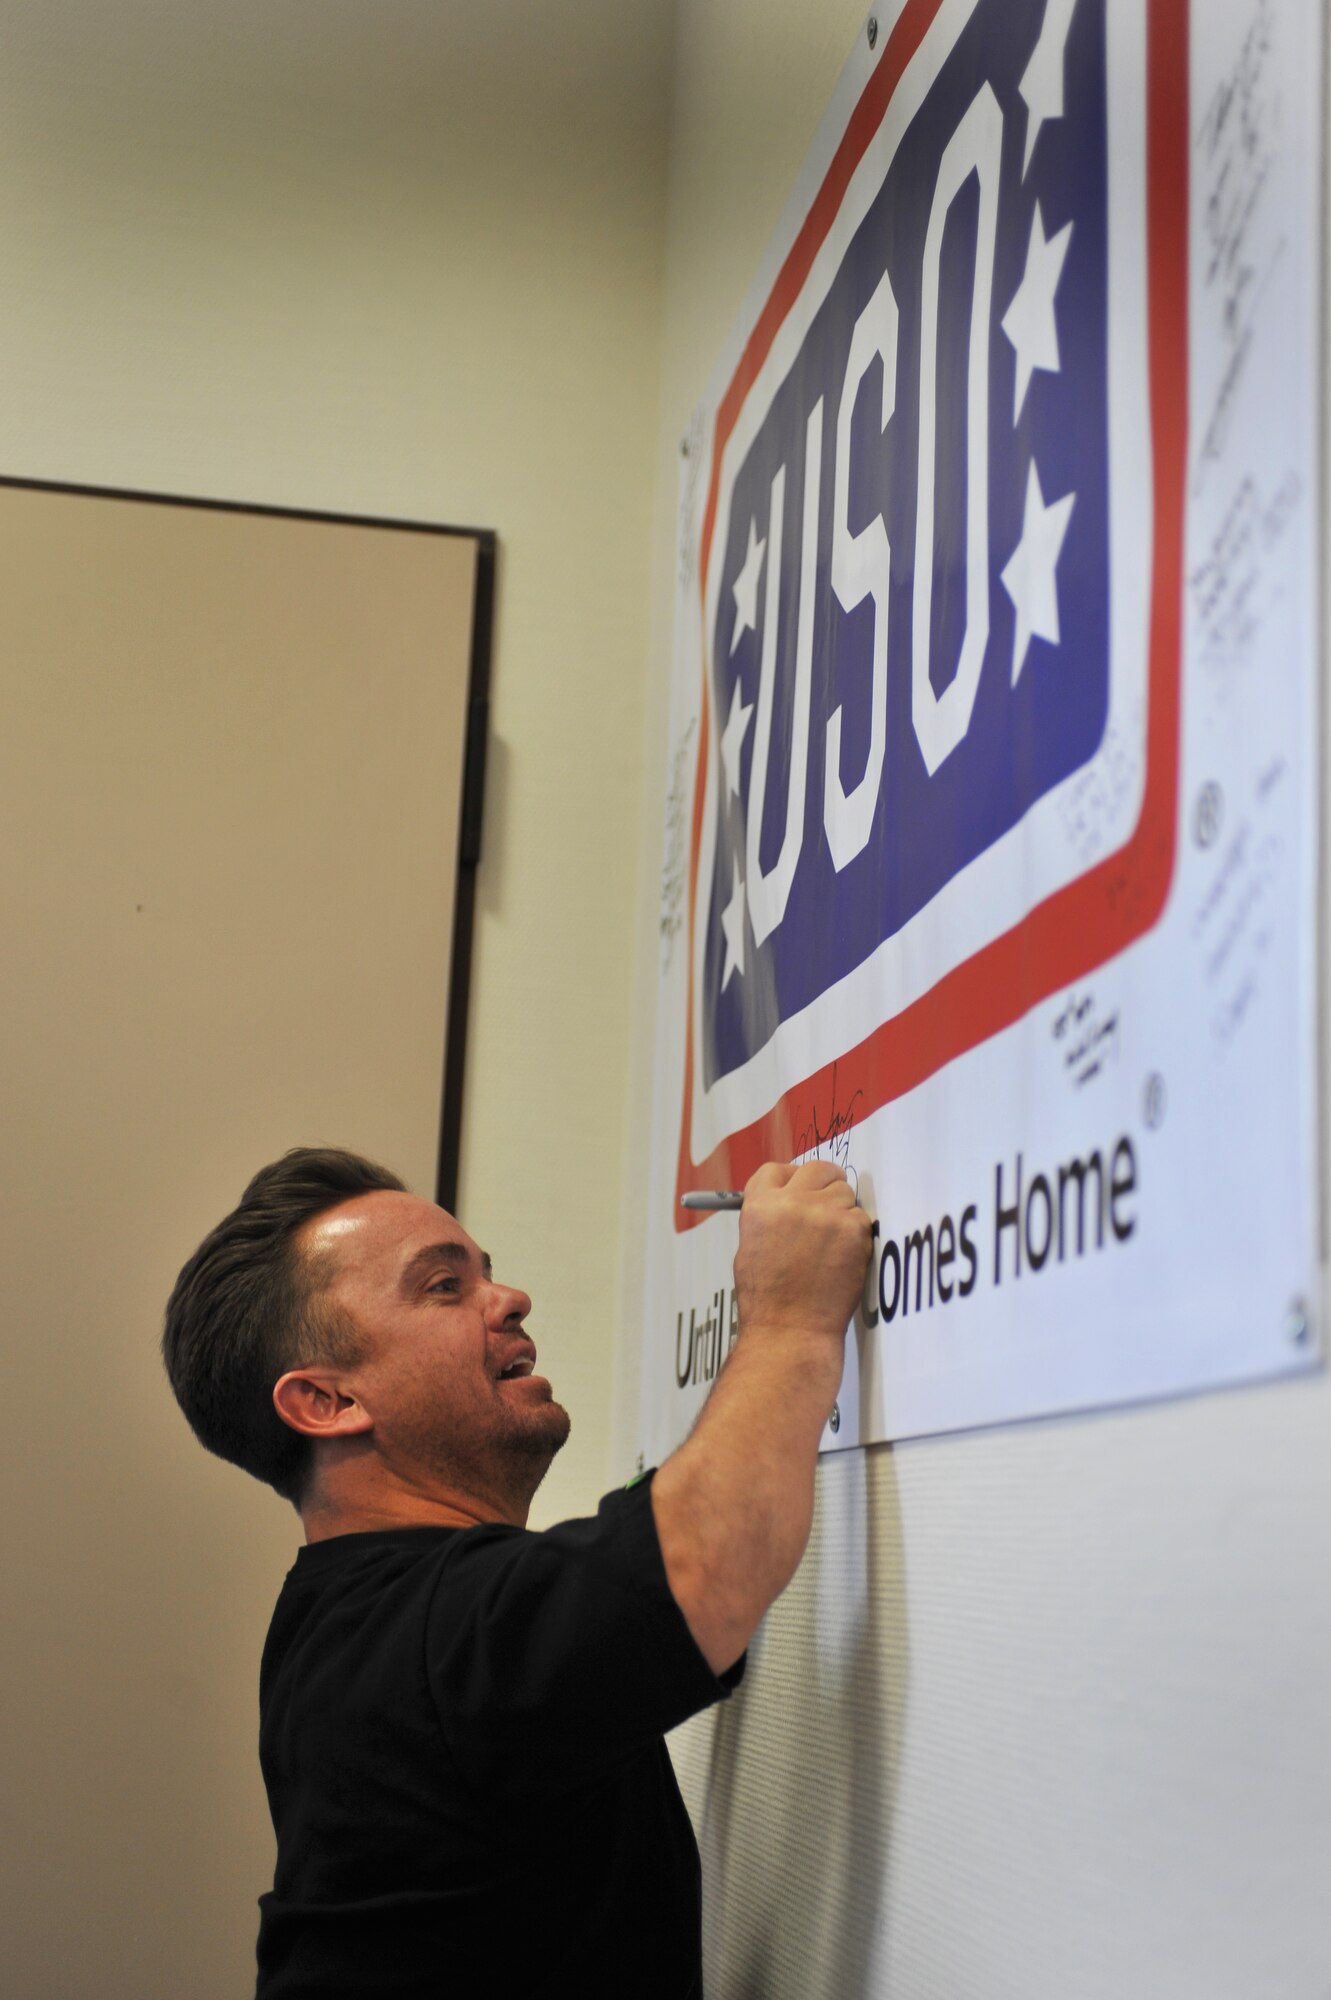 Actor Jason “Wee Man” Acuna signs a United Services Organization banner at the Contingency Aeromedical Staging Facility on Ramstein Air Base, Germany, April 20, 2012. During the United Services Organization and Armed Forces Entertainment tour, the ninth Vice Chairman of the Joint Chiefs of Staff, joined with a cast of entertainers, visited with troops stationed overseas. The tour consisted of live performances, and the group visited different organizations throughout the Kaiserslautern Military Community. (U.S. Air Force photo/Airman 1st Class Caitlin O'Neil-McKeown)